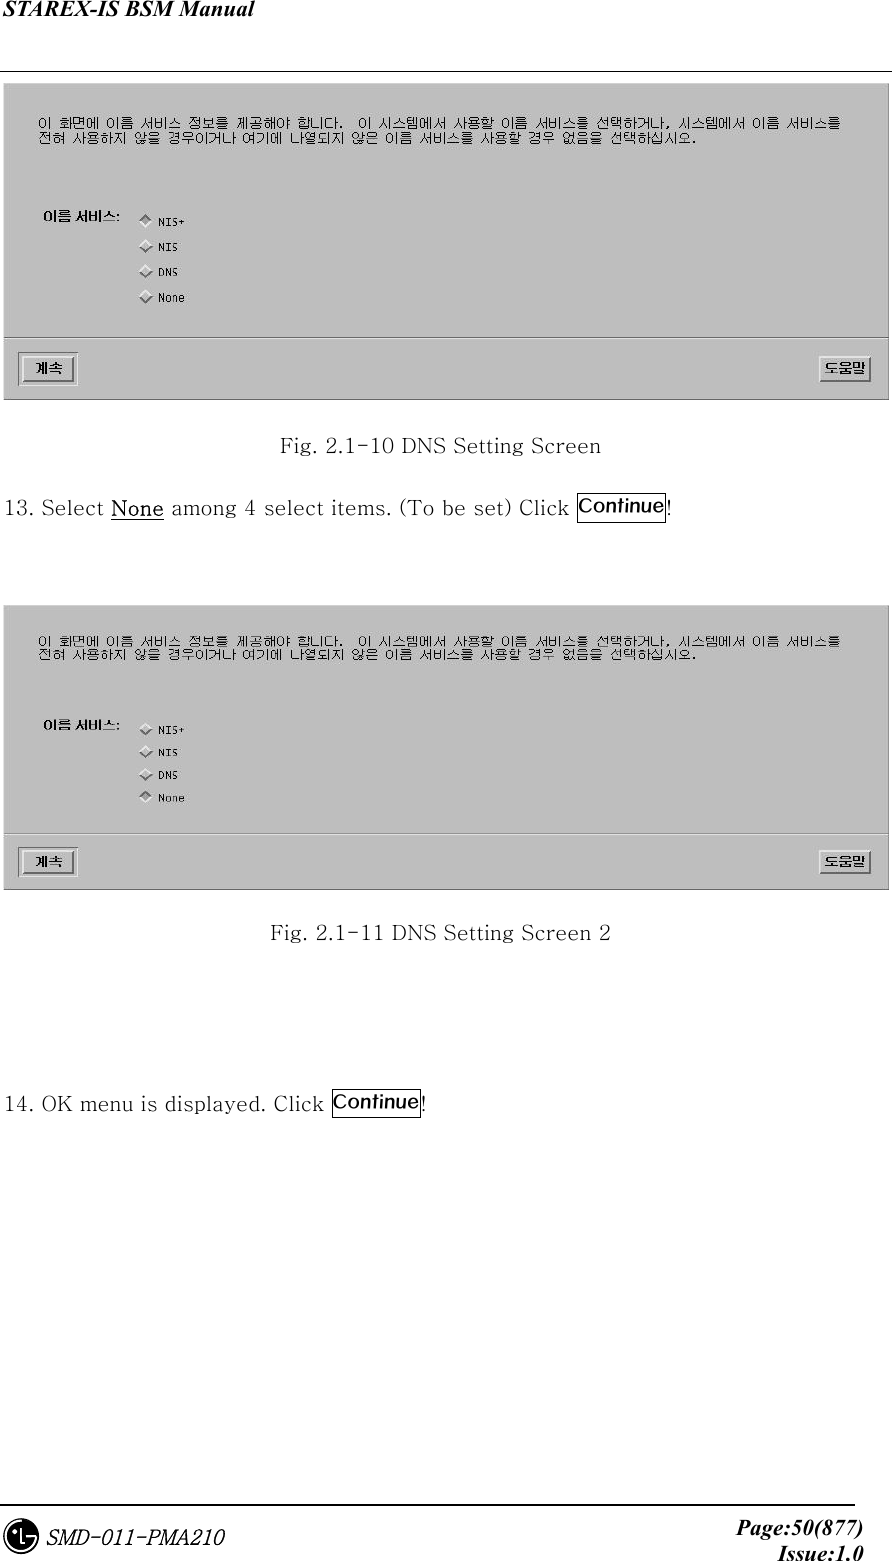 STAREX-IS BSM Manual     Page:50(877)Issue:1.0SMD-011-PMA210  Fig. 2.1-10 DNS Setting Screen 13. Select None among 4 select items. (To be set) Click Continue!   Fig. 2.1-11 DNS Setting Screen 2   14. OK menu is displayed. Click Continue!   